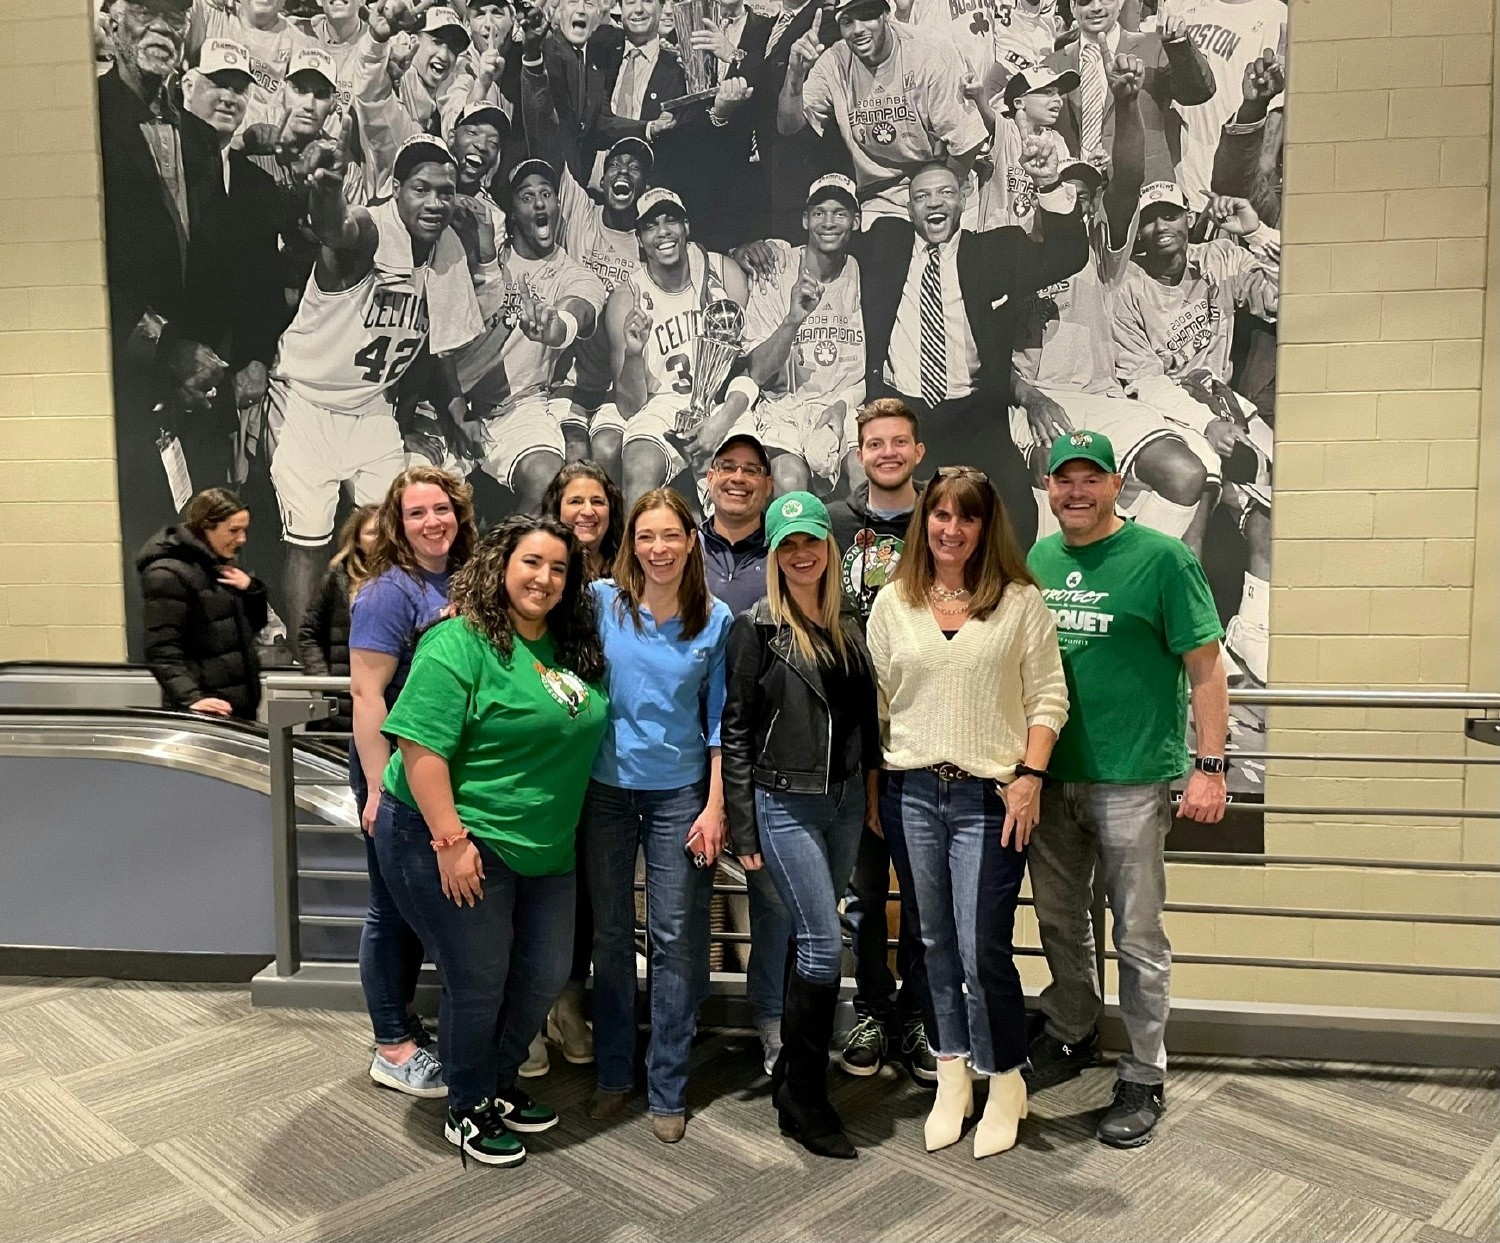 ClearPlanners also love cheering on our favorite sports teams too!  This is a New England Region event at the Celtics. 